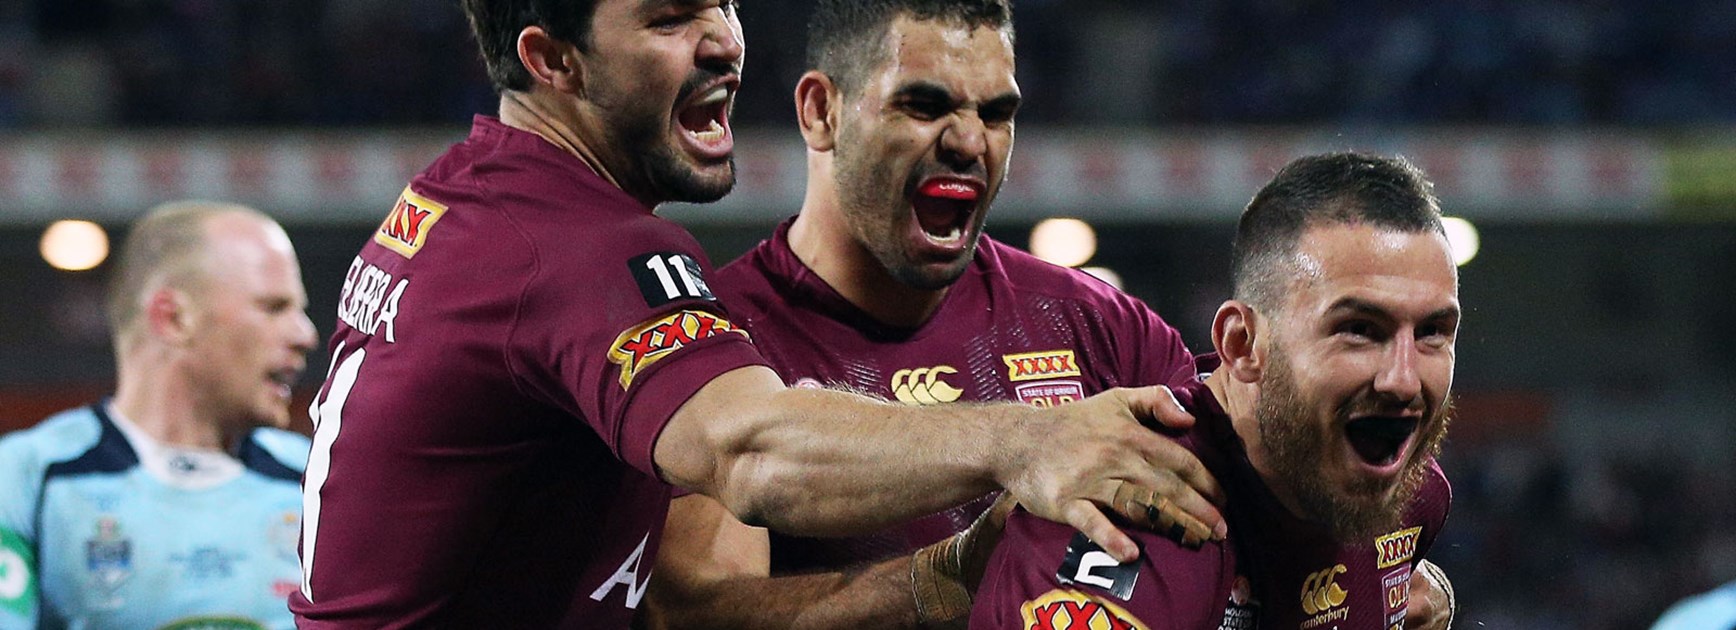 Darius Boyd and Greg Inglis form one of the most dangerous edge combinations in Origin history.